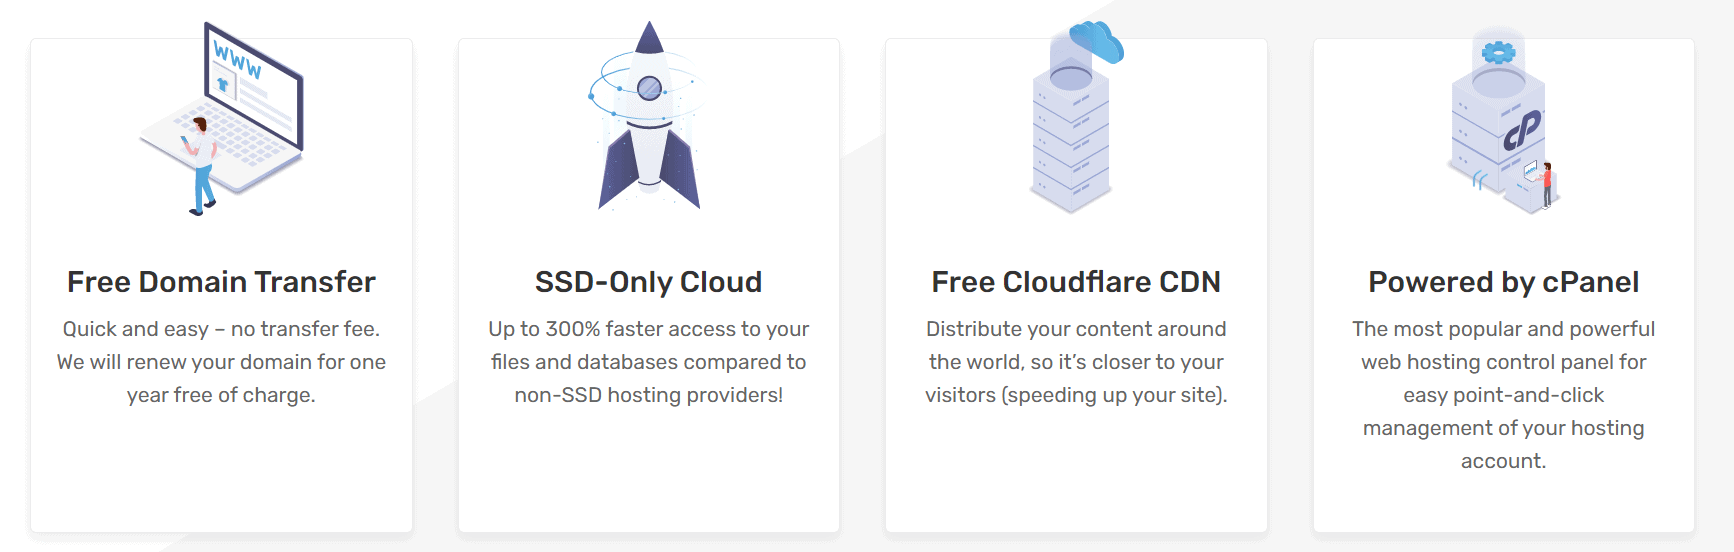 FastComet-Managed-Cloud-Hosting-with-24-7-Support